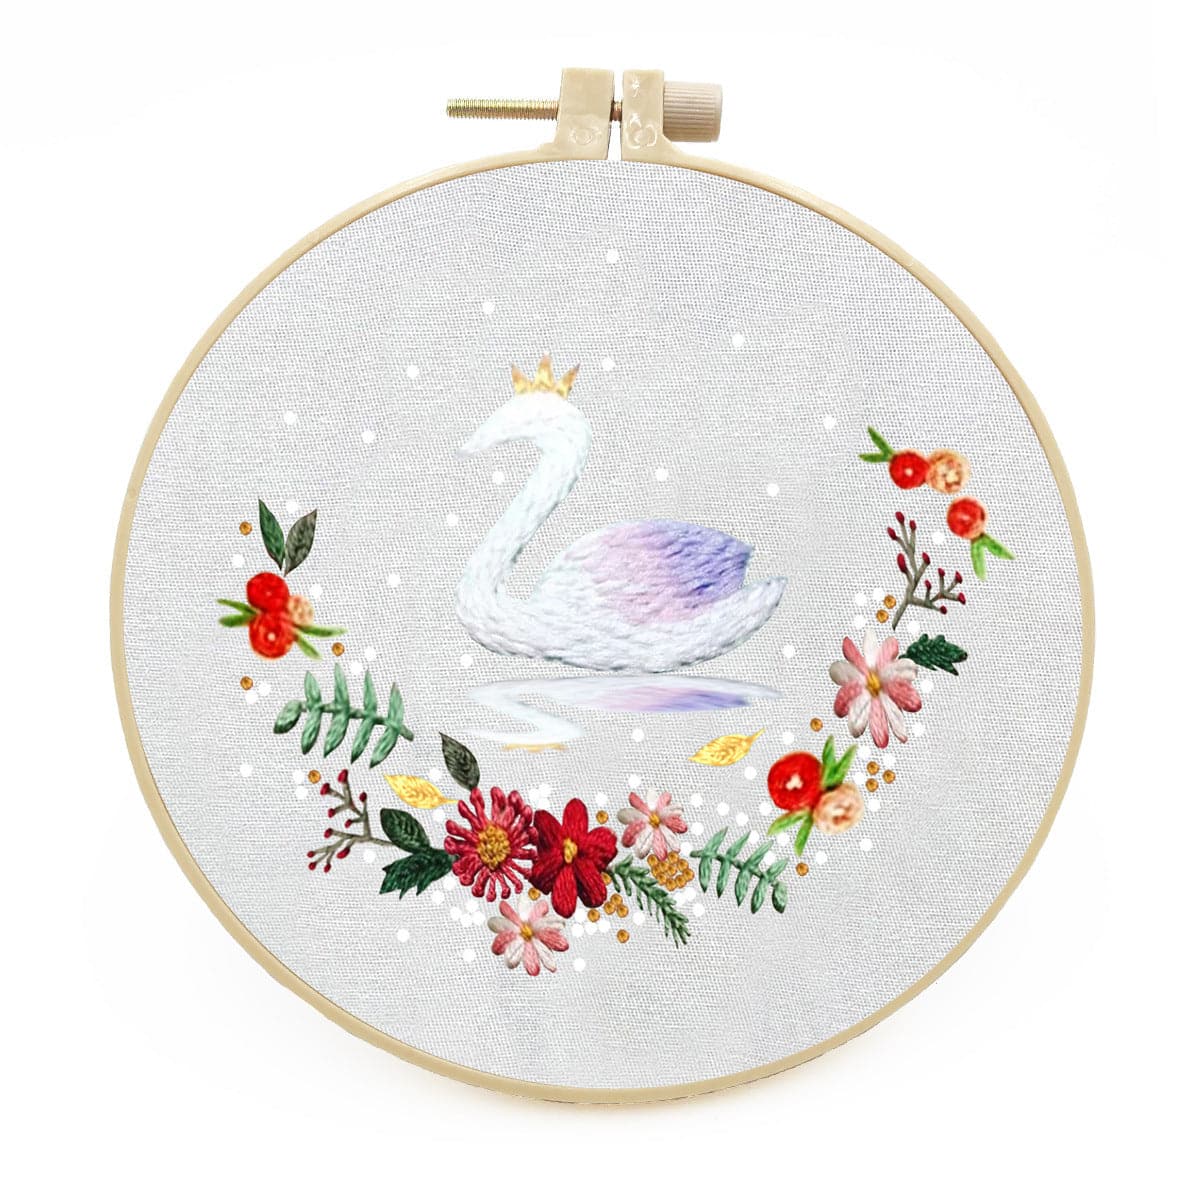 Santa and the Swan - Embroidery ktclubs.com